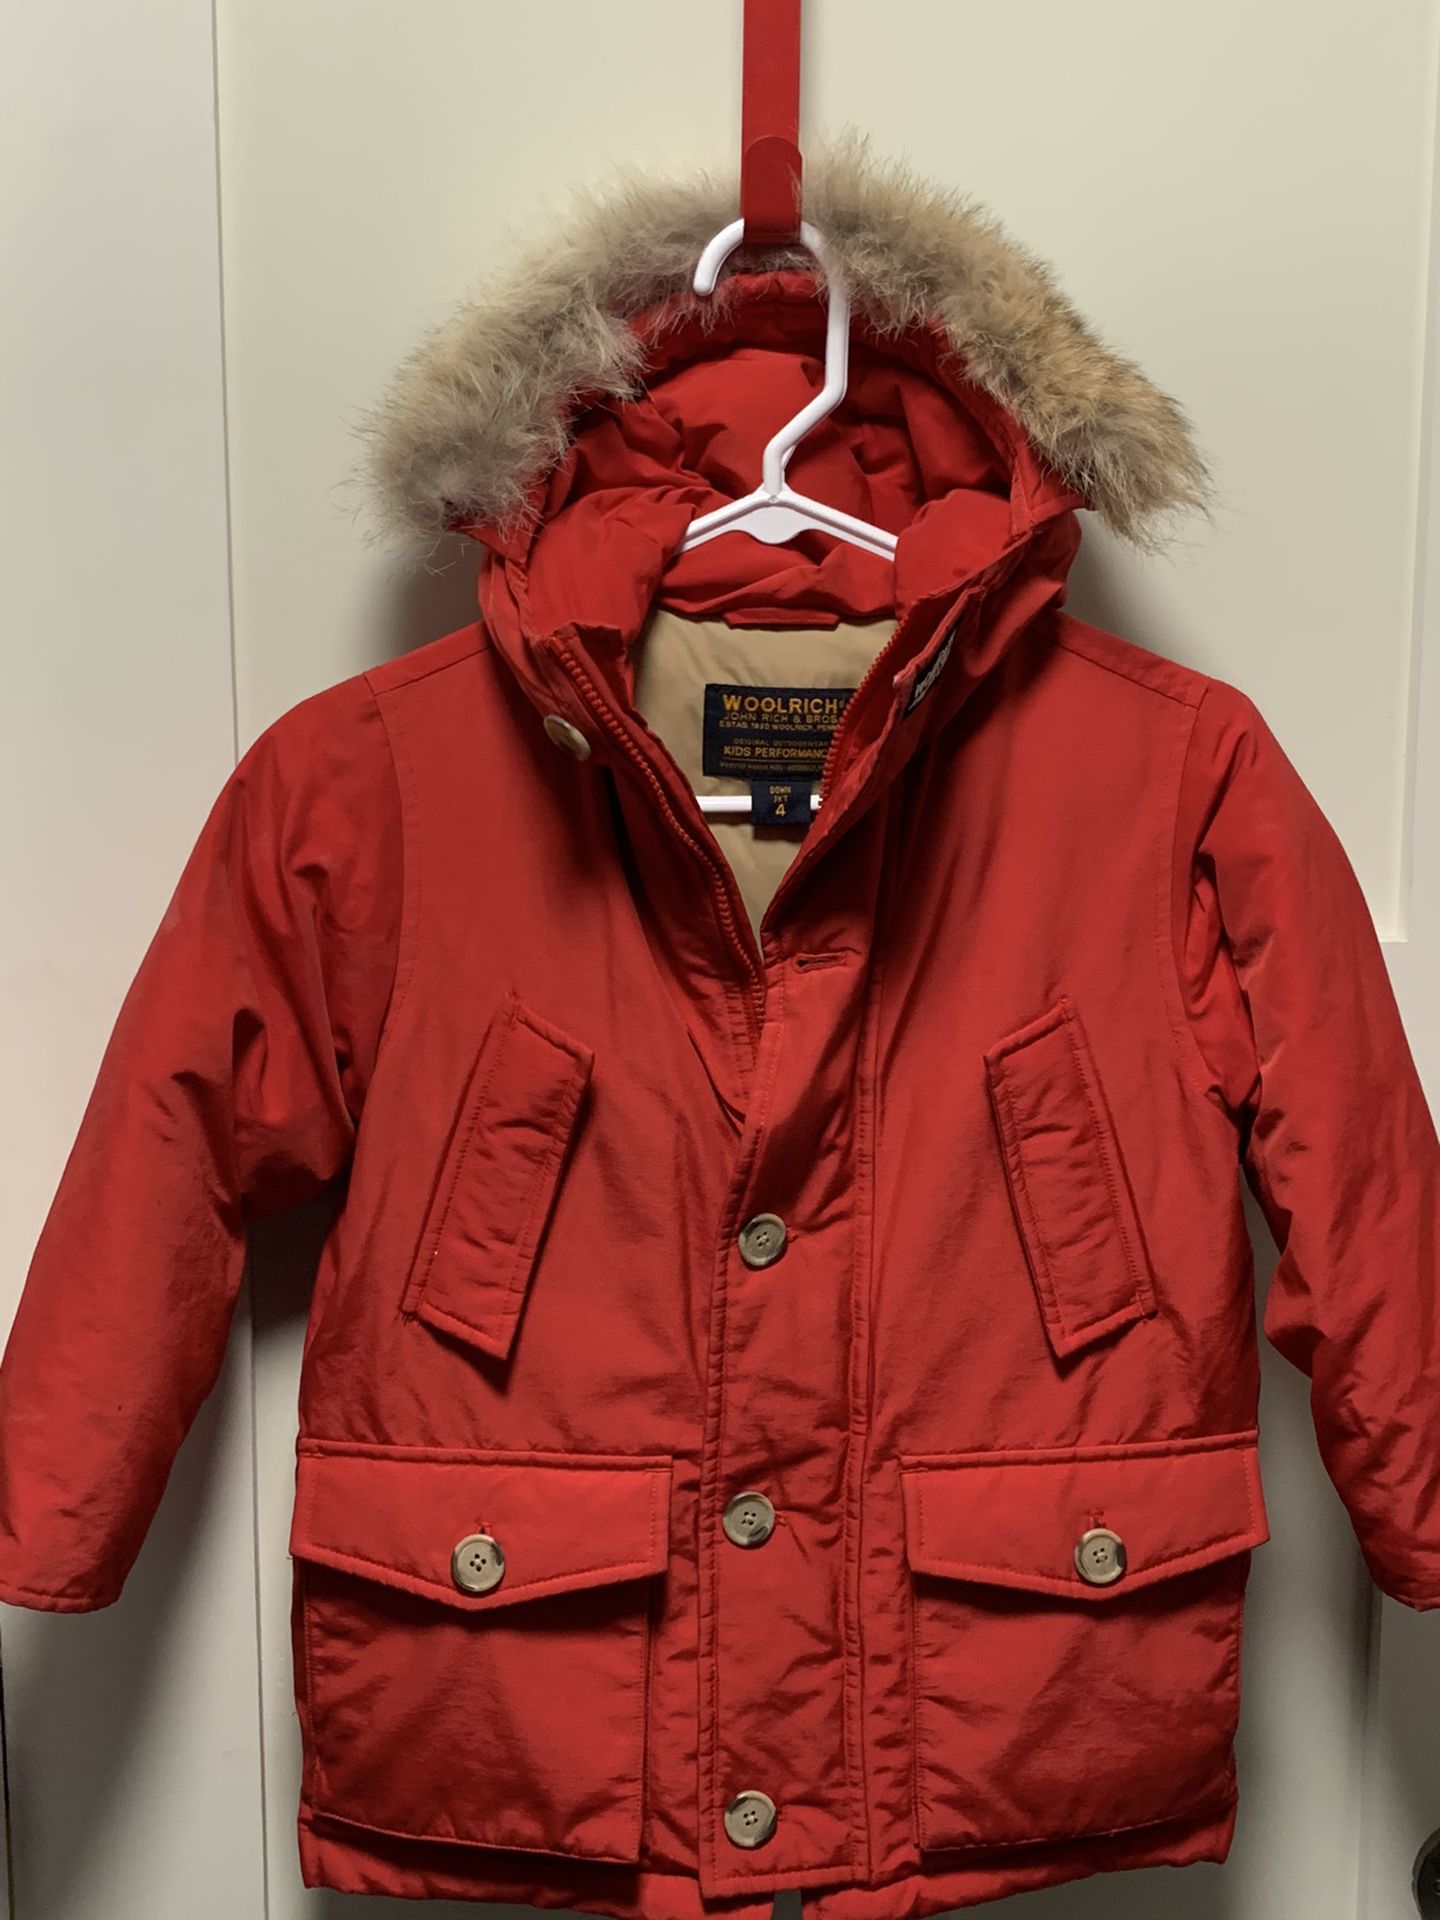 Woolrich size 4 -5 down parka / coat with removable fur trim